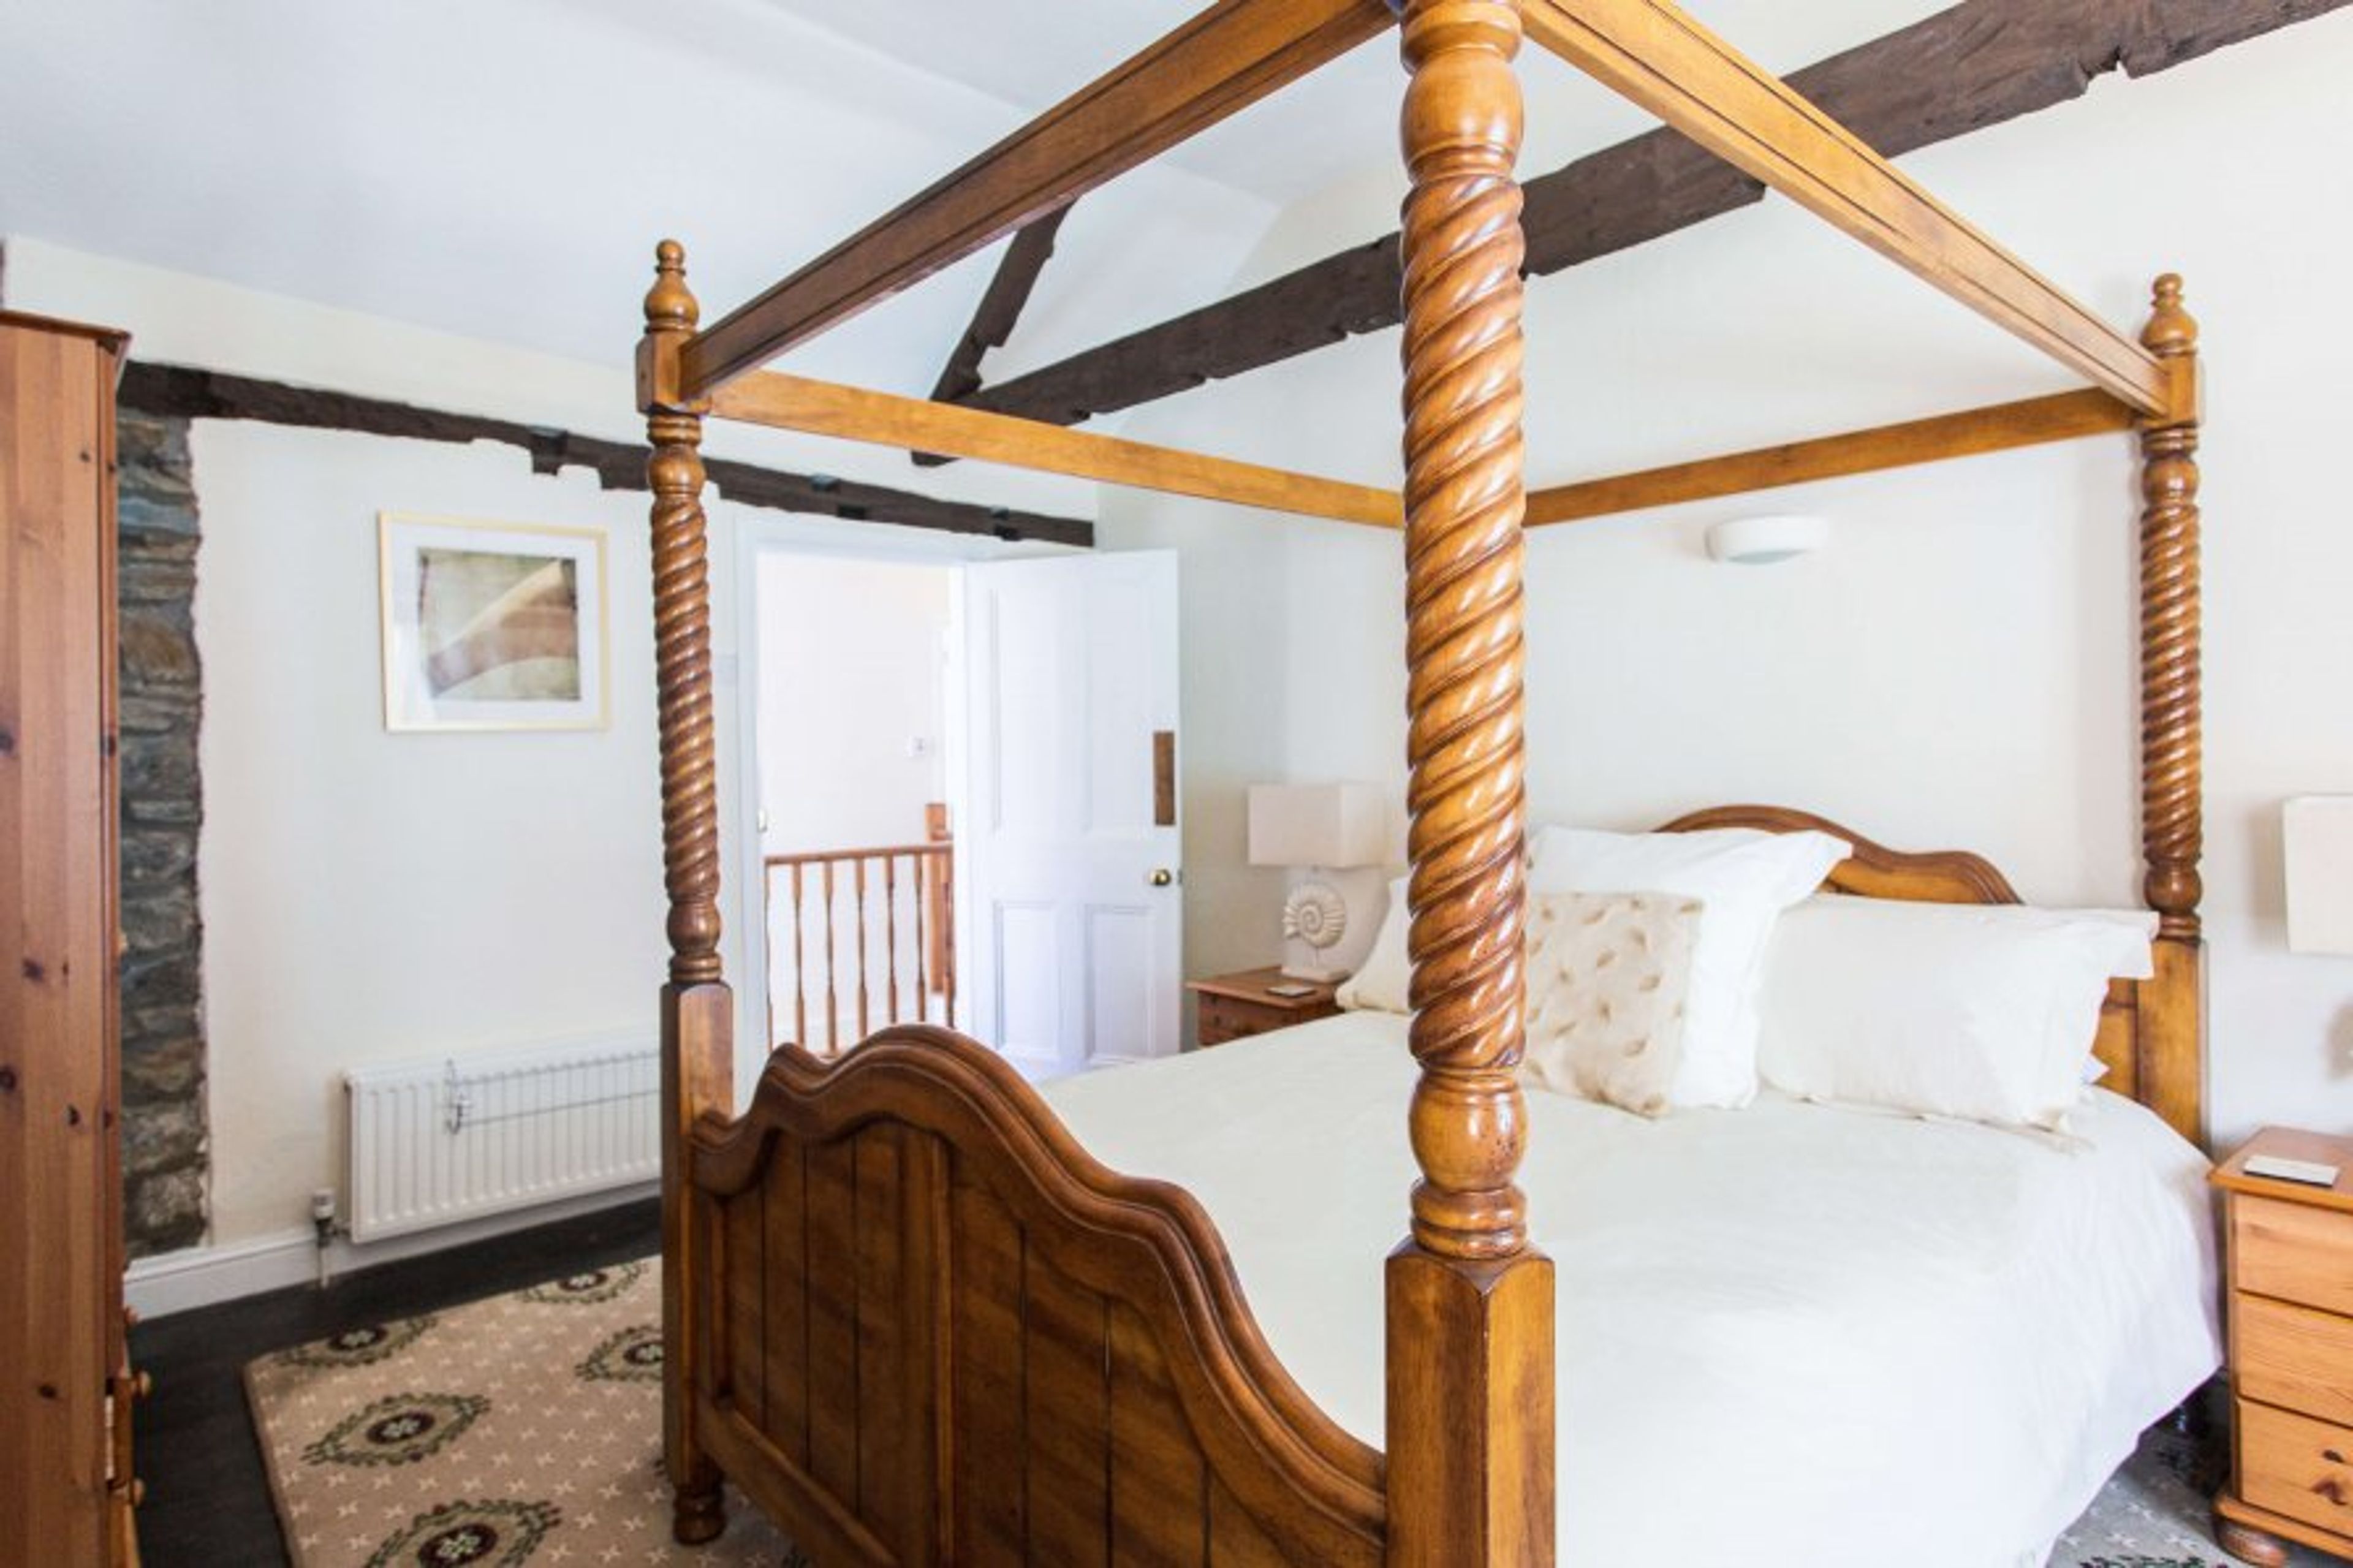 King size four poster bed